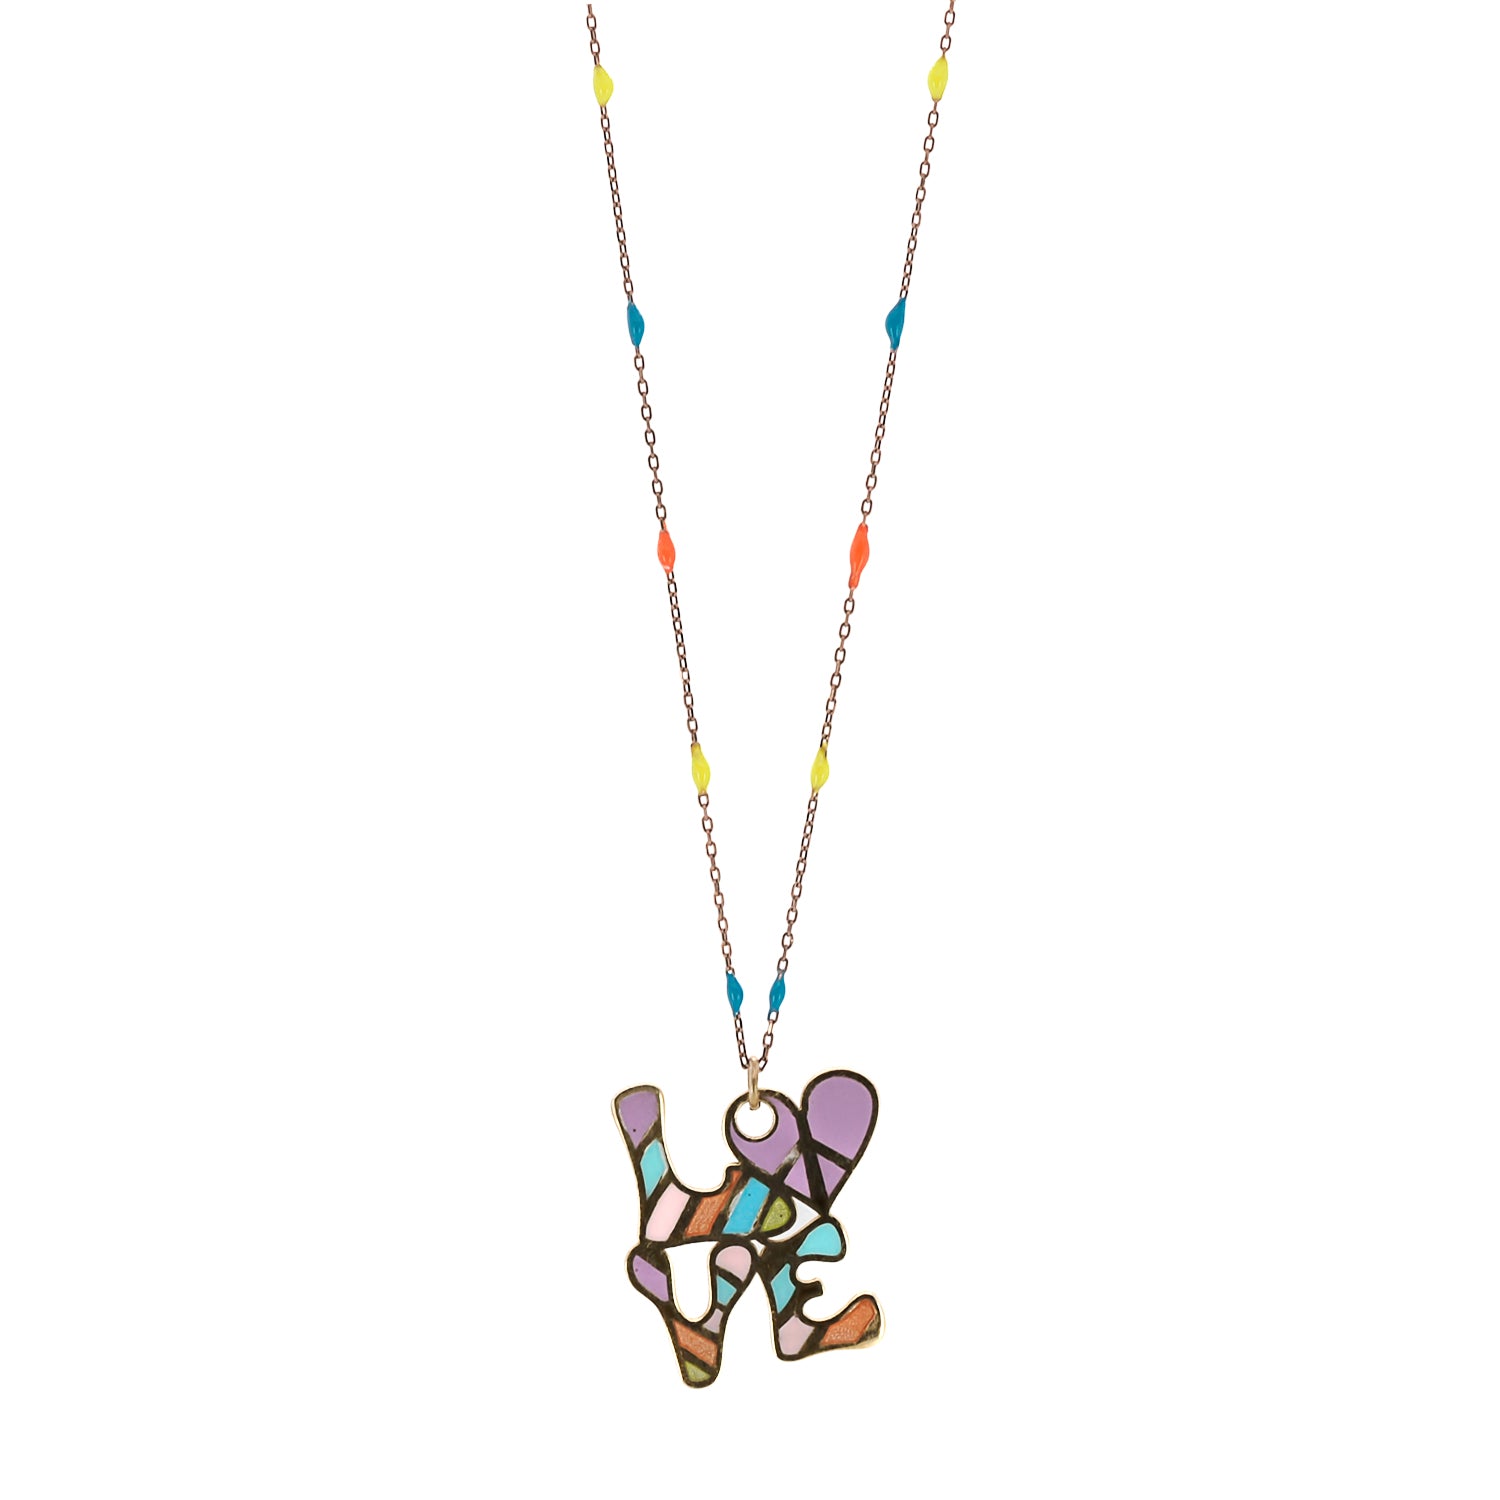 The Color of Love Necklace features a delicate gold-plated chain made of sterling silver, adorned with a unique "Love" pendant. The colorful enamel beads on the pendant add depth and vibrancy to this meaningful and handcrafted piece of jewelry.